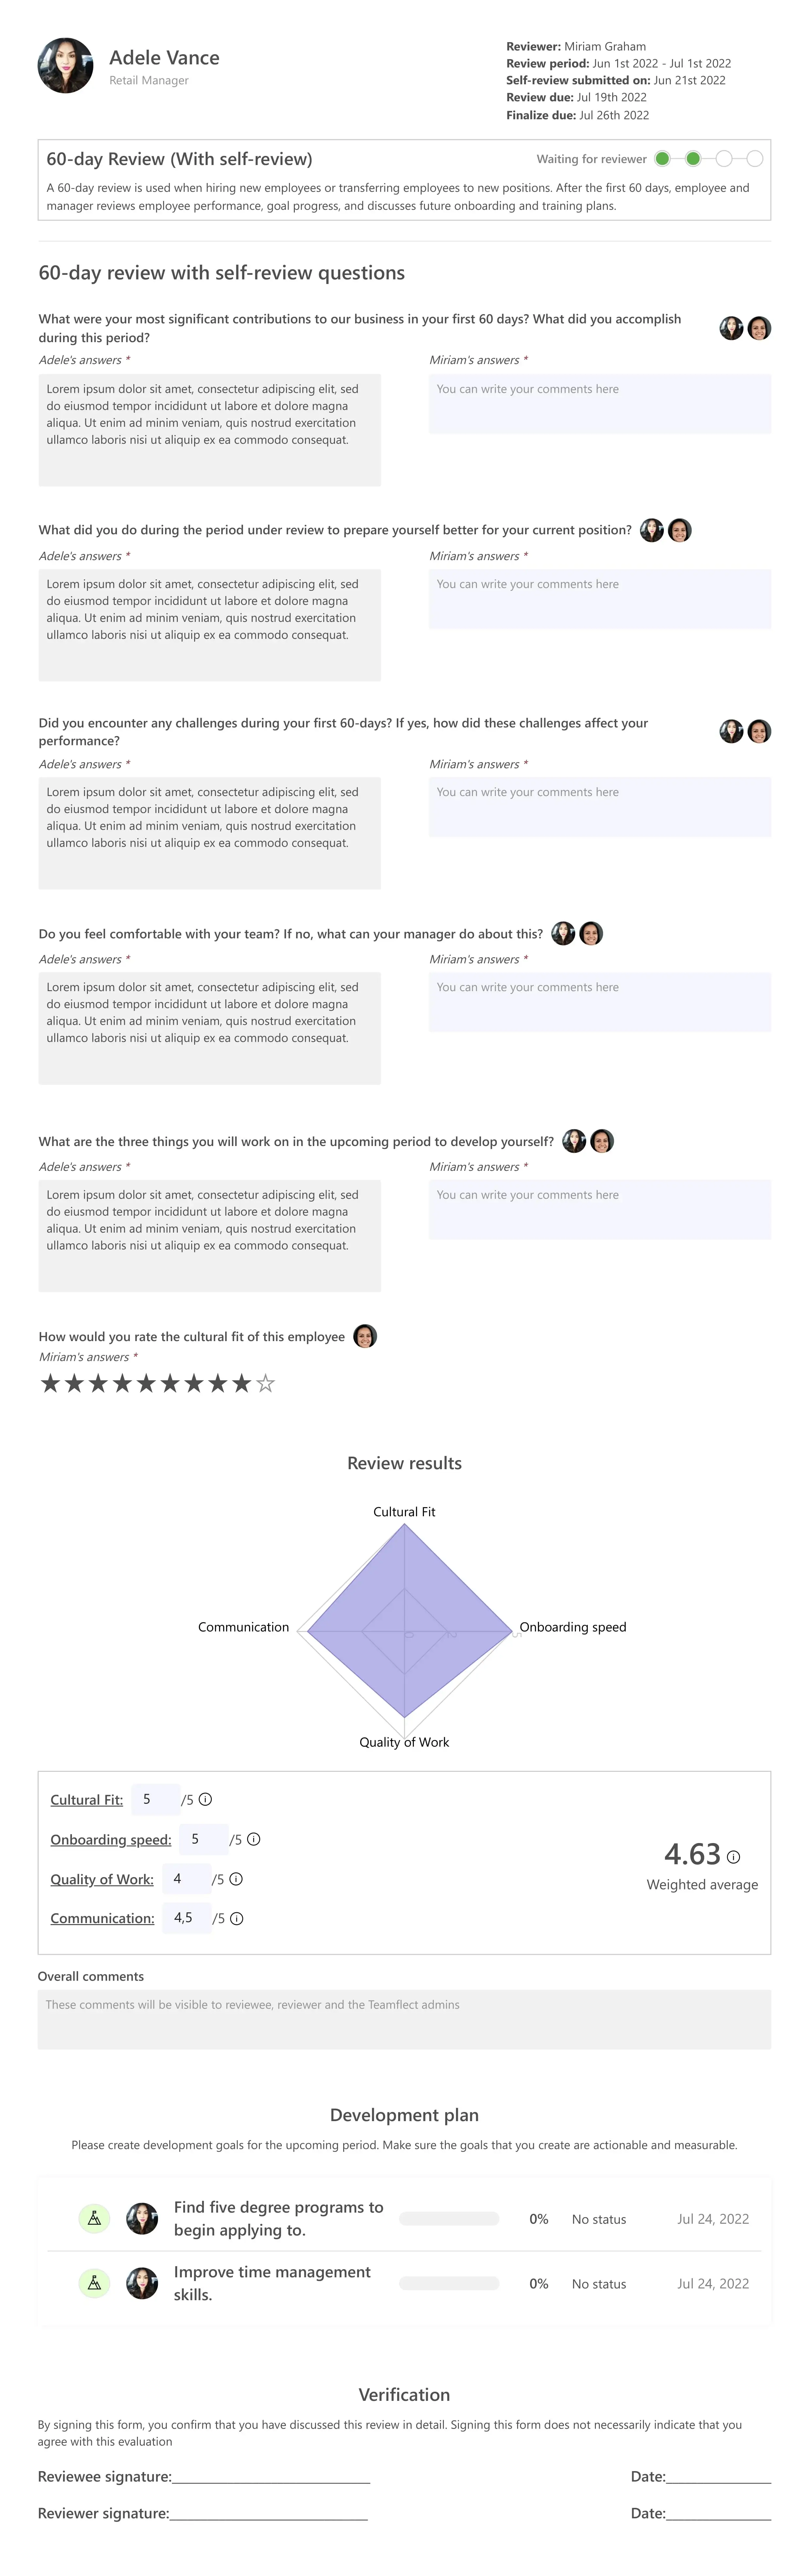 Teamflect 60-day review with self review template in Microsoft Teams